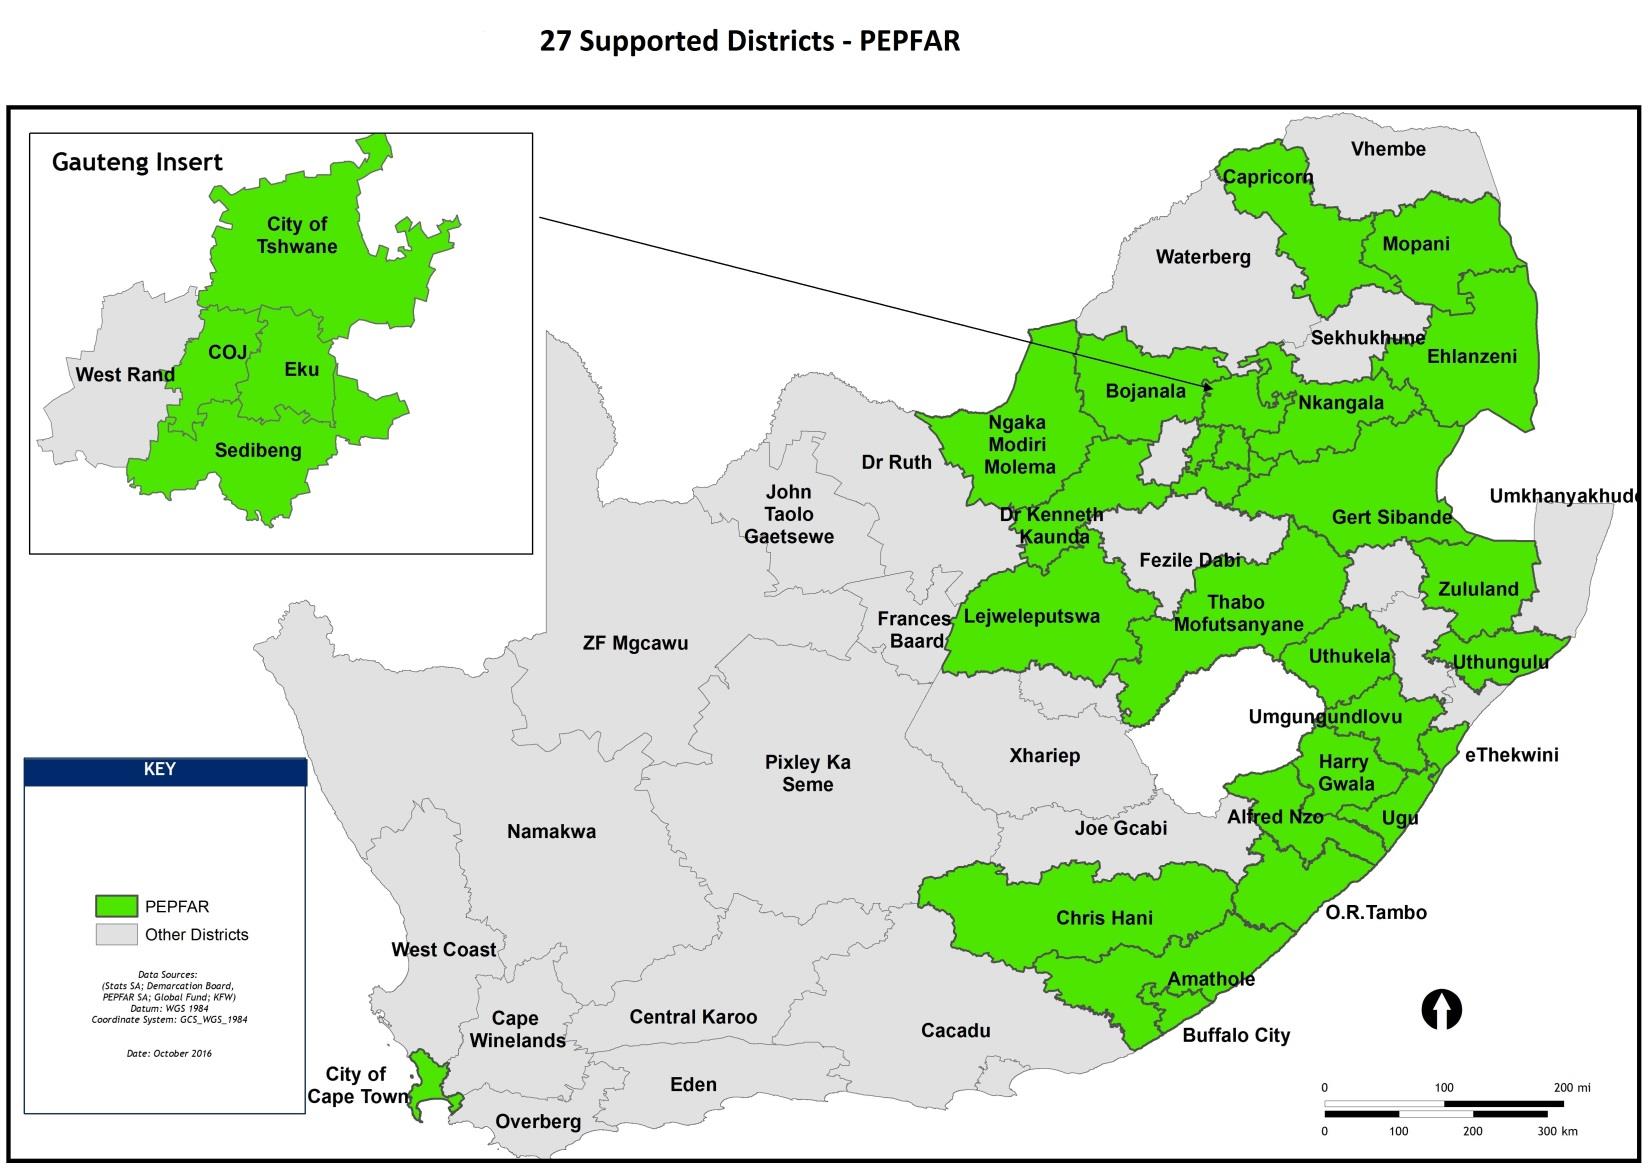 This image shows the PEPFAR districts in South Africa